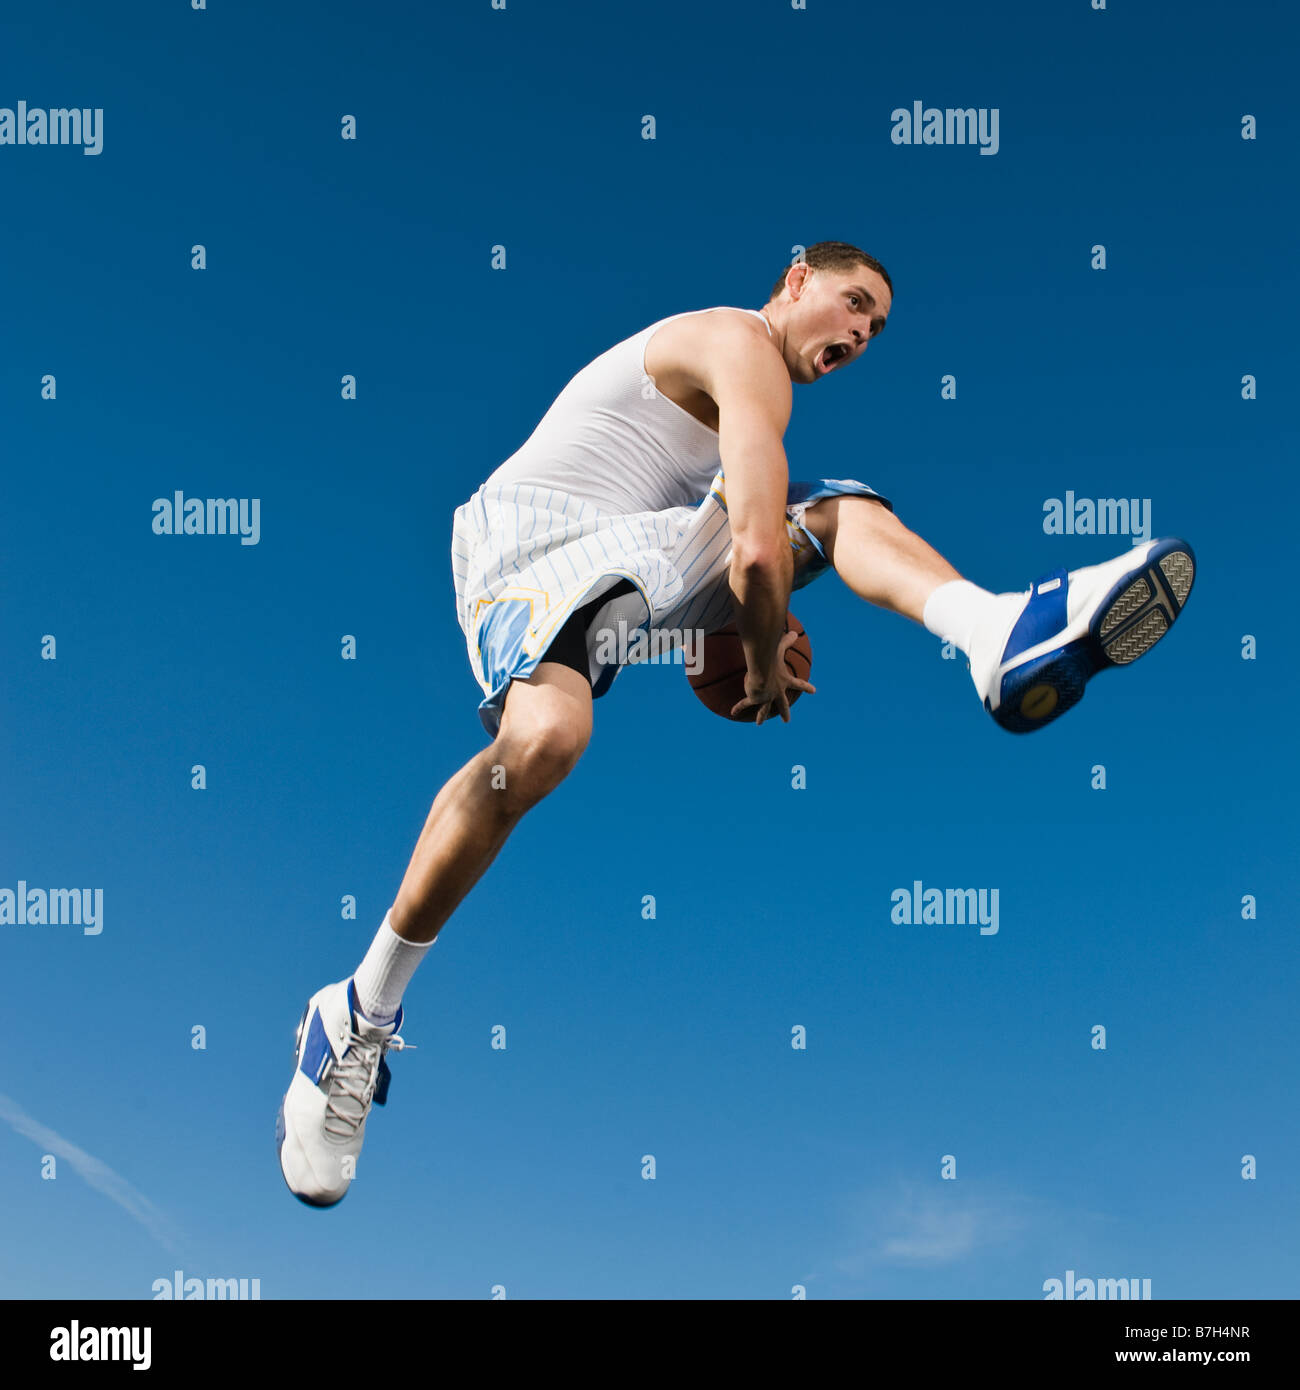 African man playing basketball in mid-air Stock Photo